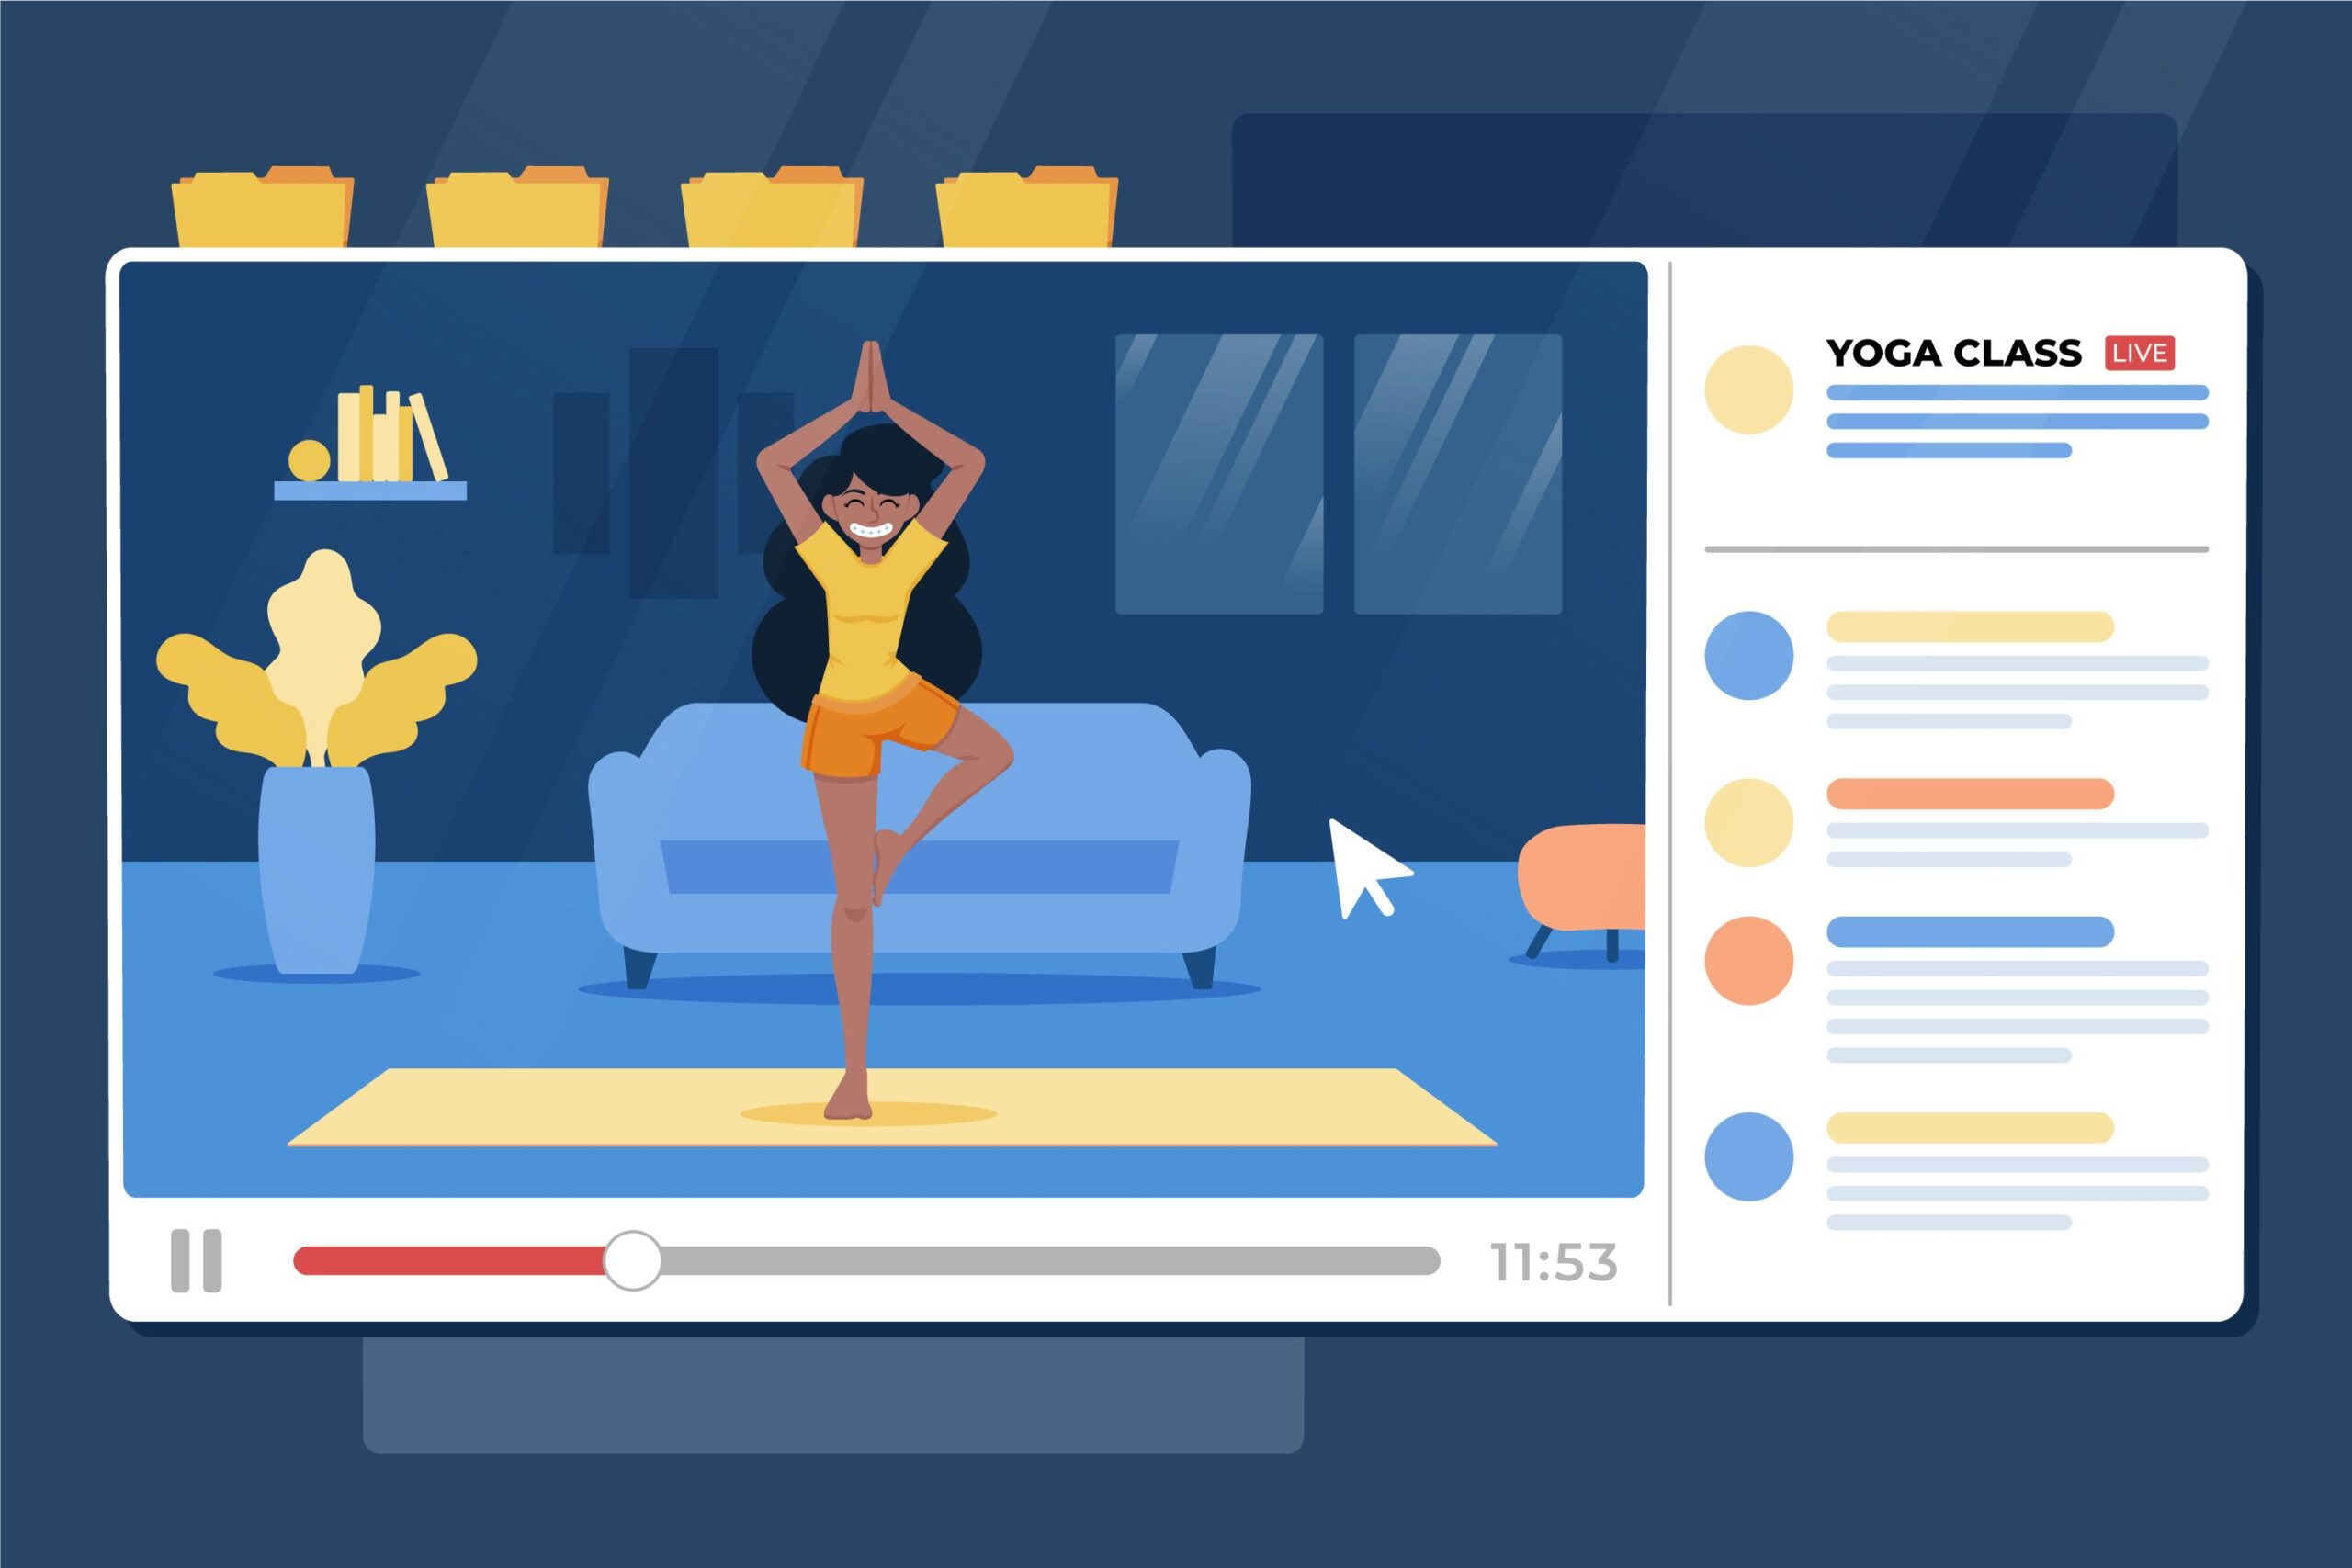 How An Animated Fitness Video Can Get You More Clients For Your Personal Coaching & Fitness Business